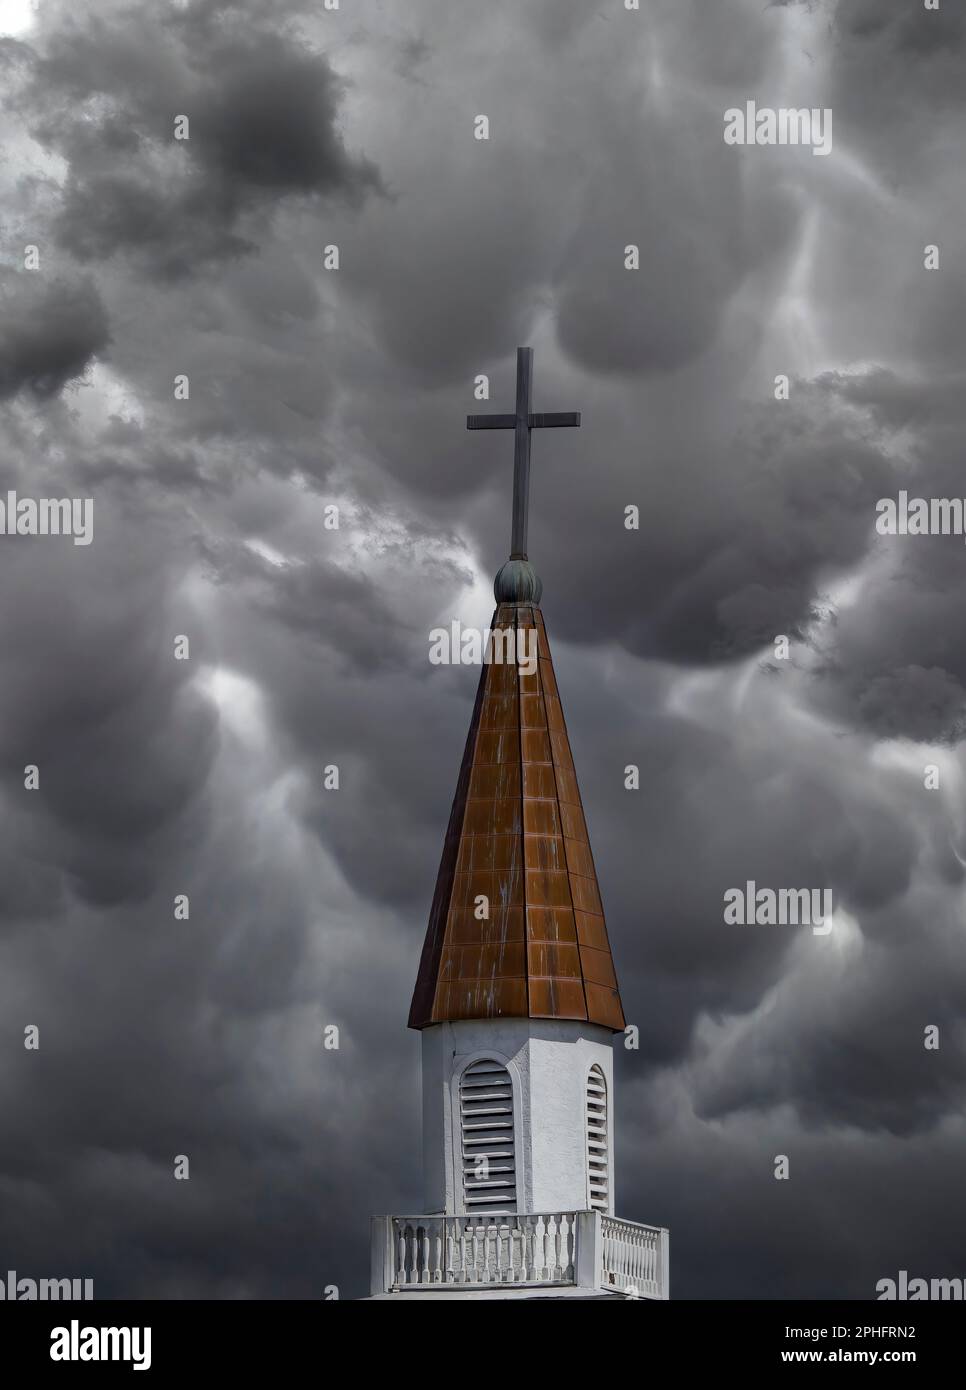 Church steeple with cross on top against a dark stormy sky Stock Photo